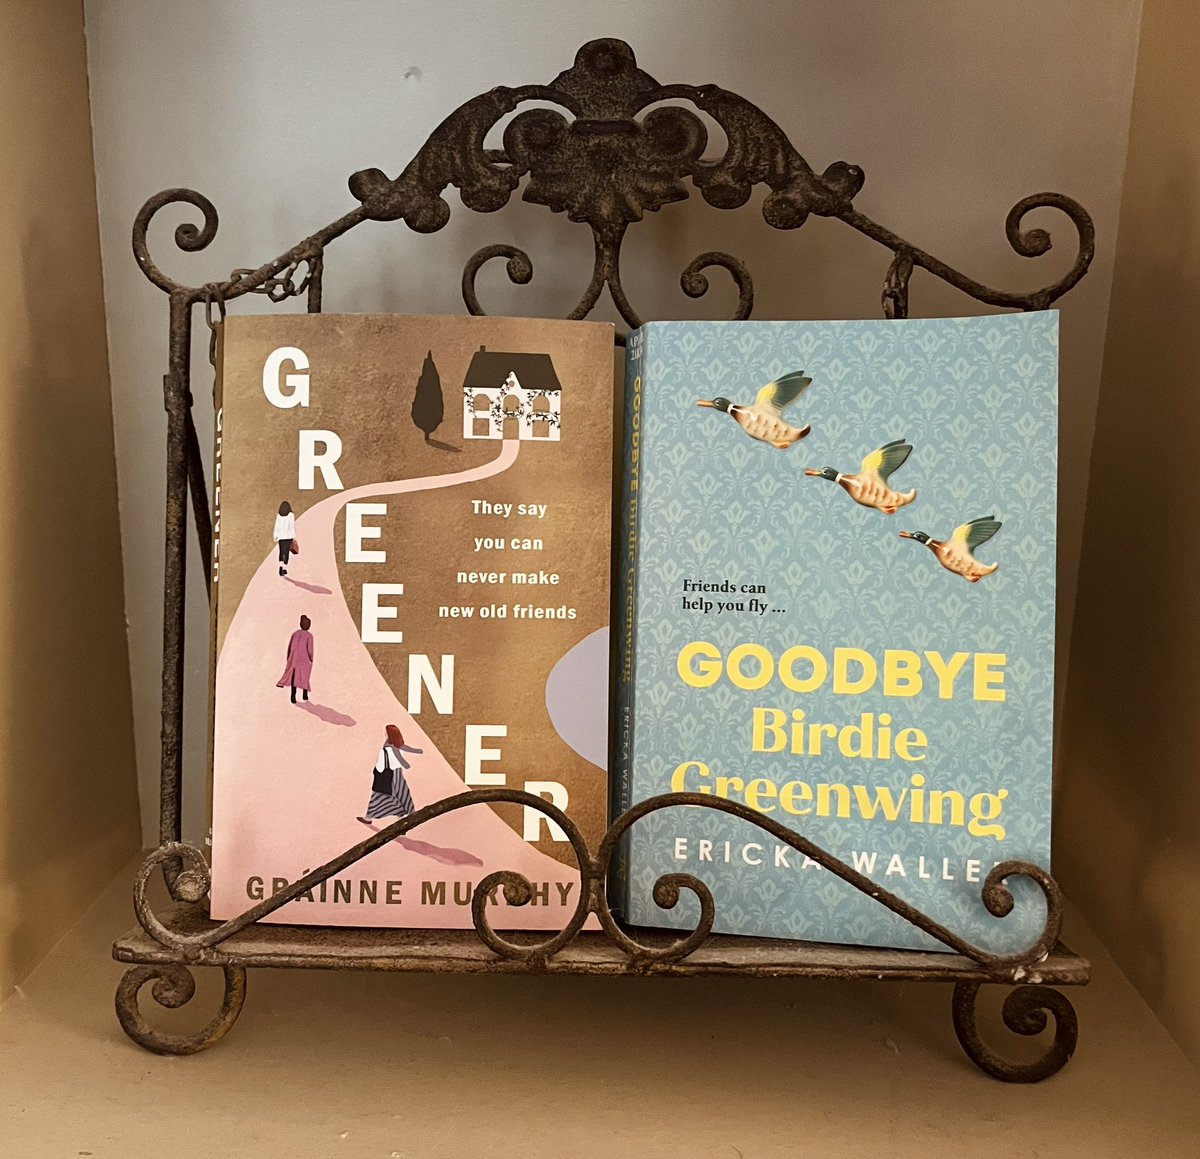 Coming April 24. Two fabulous books about friendship. The complexity of old friendships - GREENER by Grainne Murphy. The hope of new ones - GOODBYE BIRDIE GREENWING by Ericka Waller. @GraMurphy @ErickaWaller1